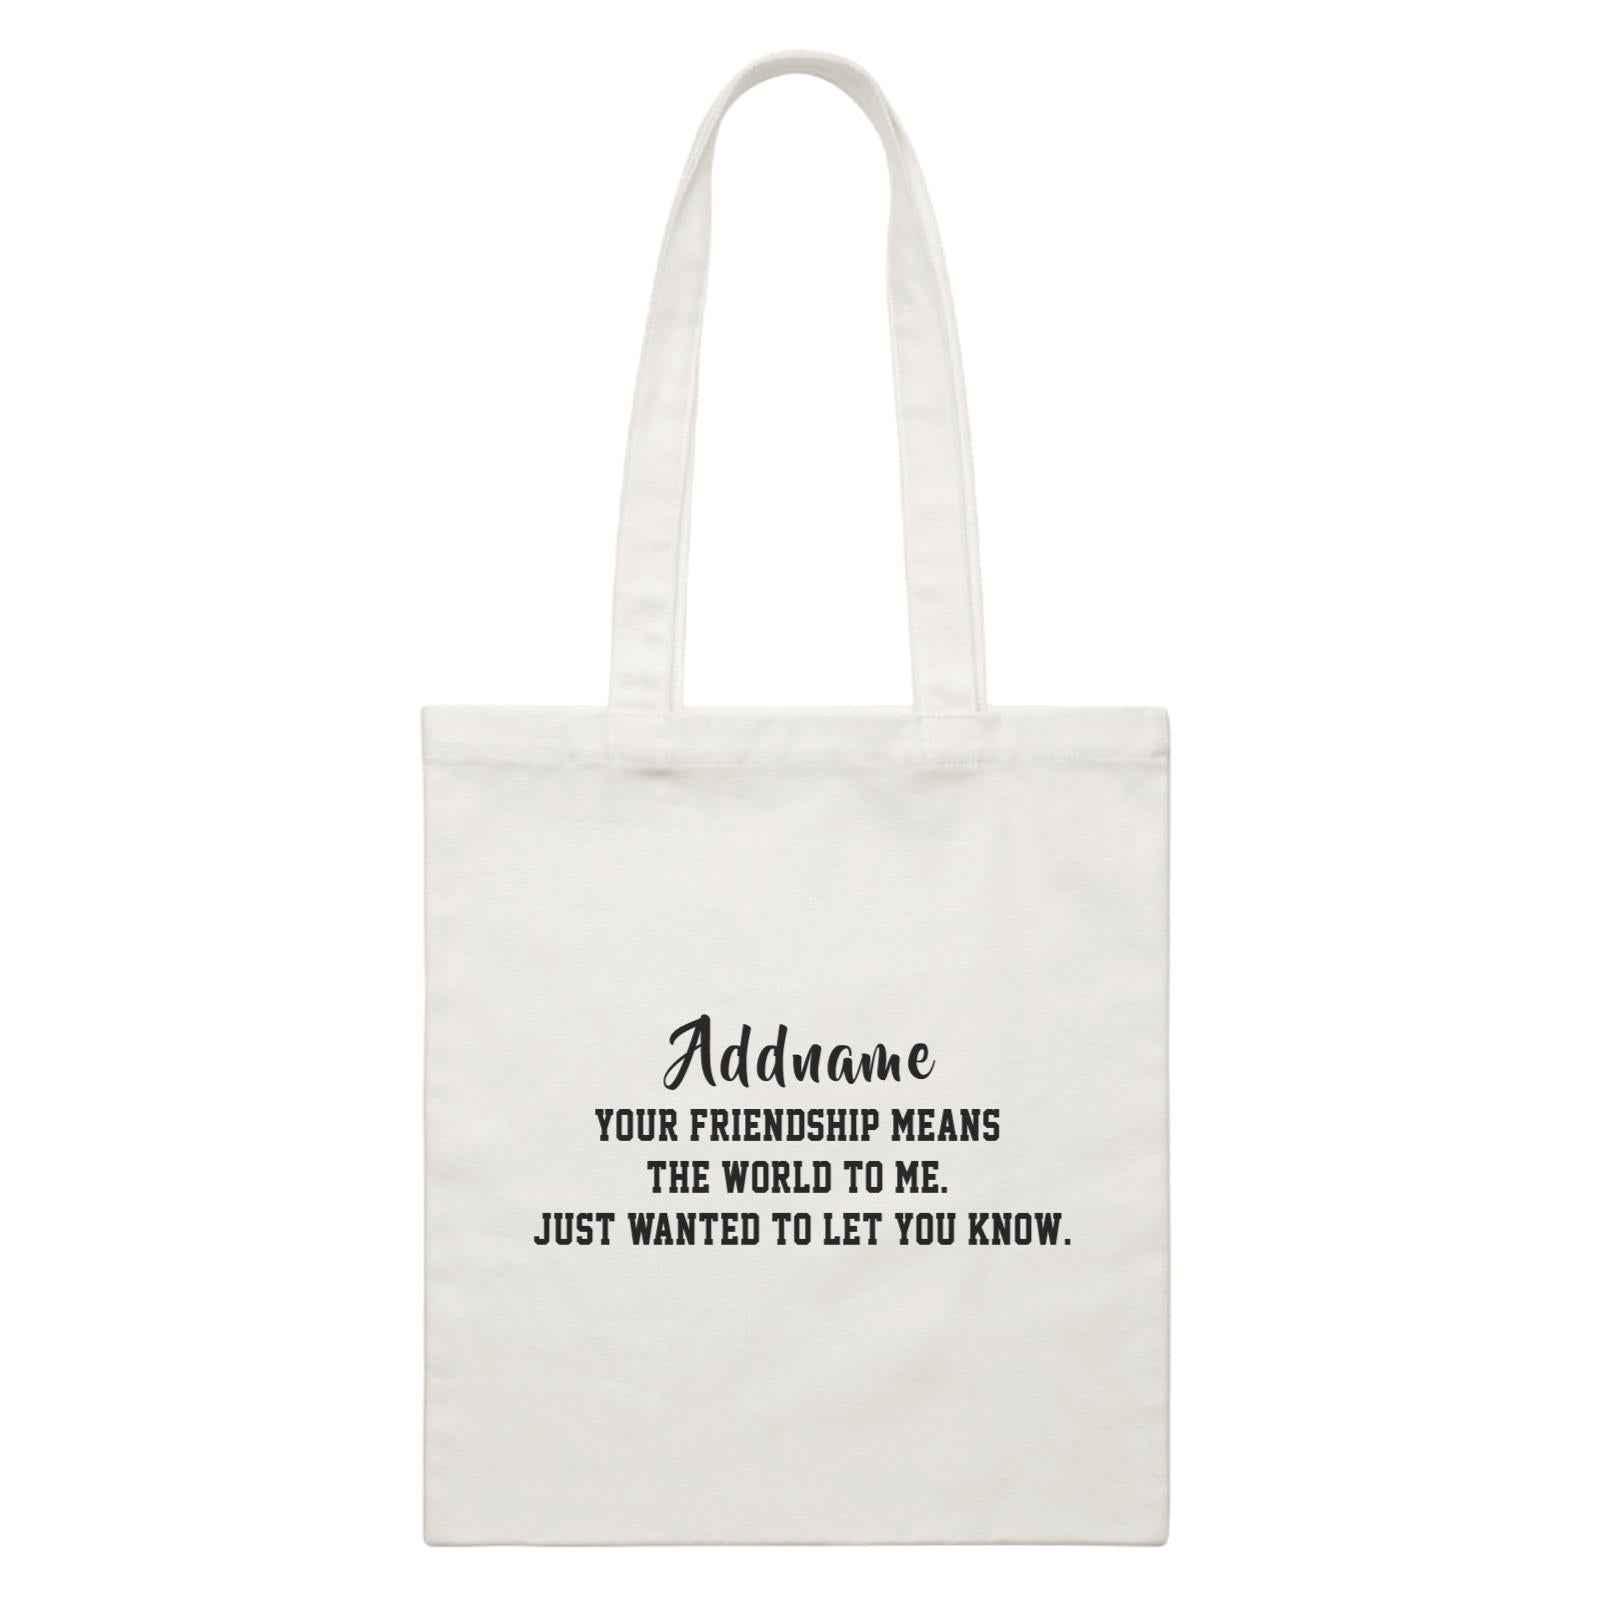 Best Friends Quotes Addname Your Friendship Means The World To Me White Canvas Bag